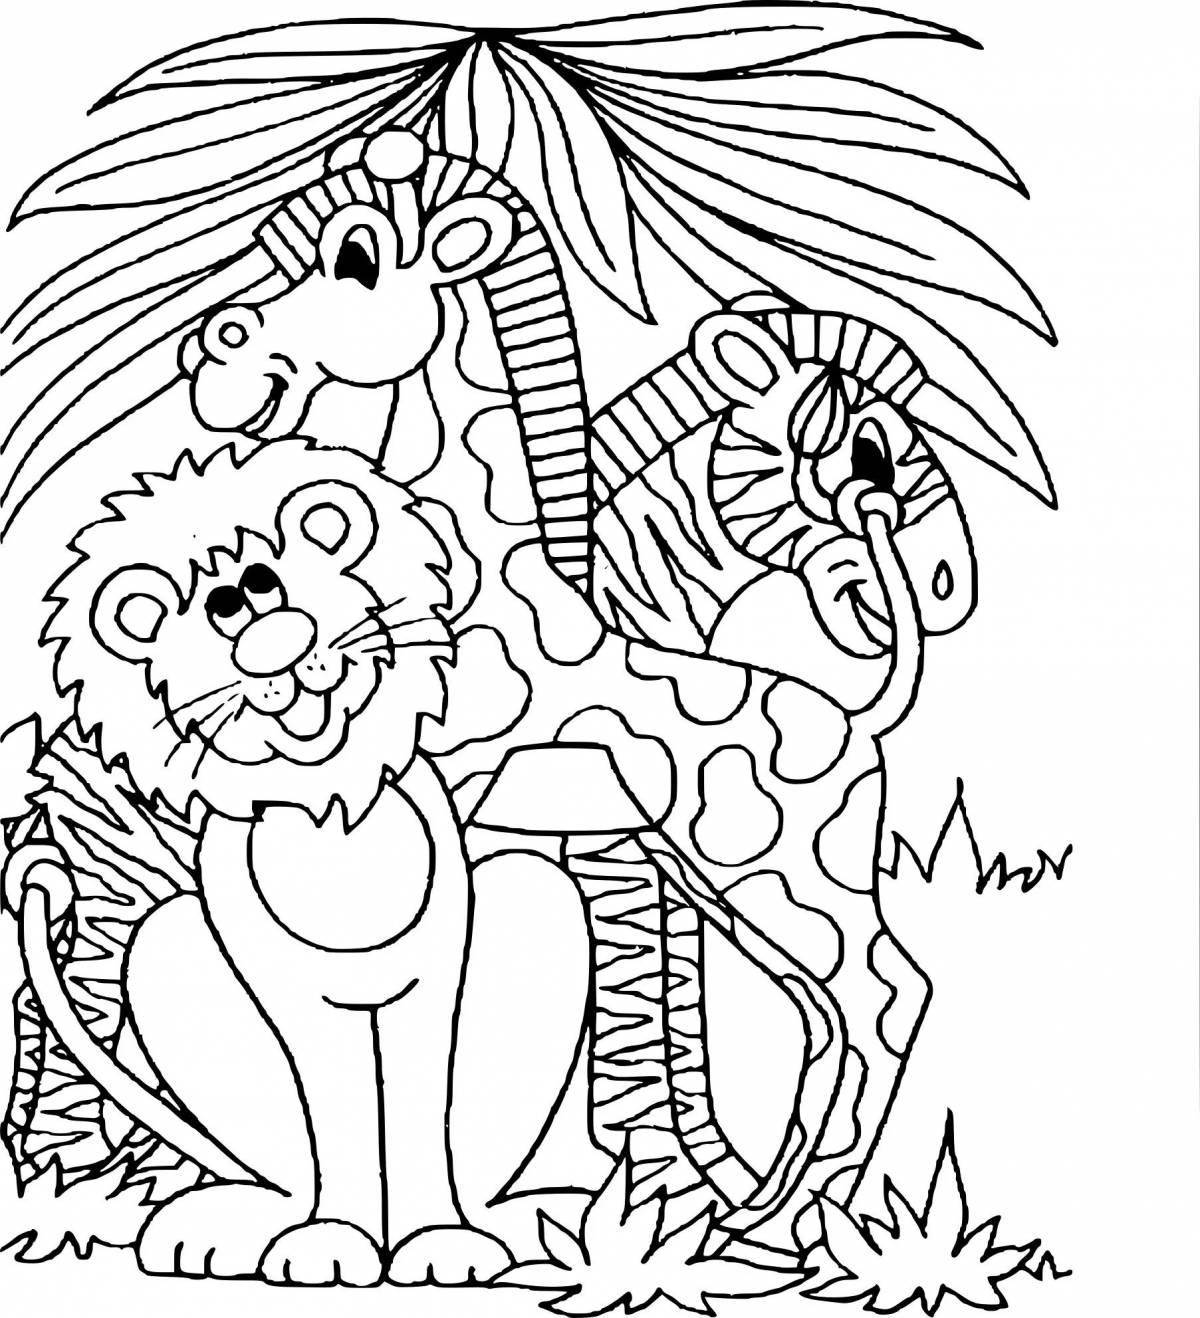 Wonderful coloring of African animals for children 6-7 years old